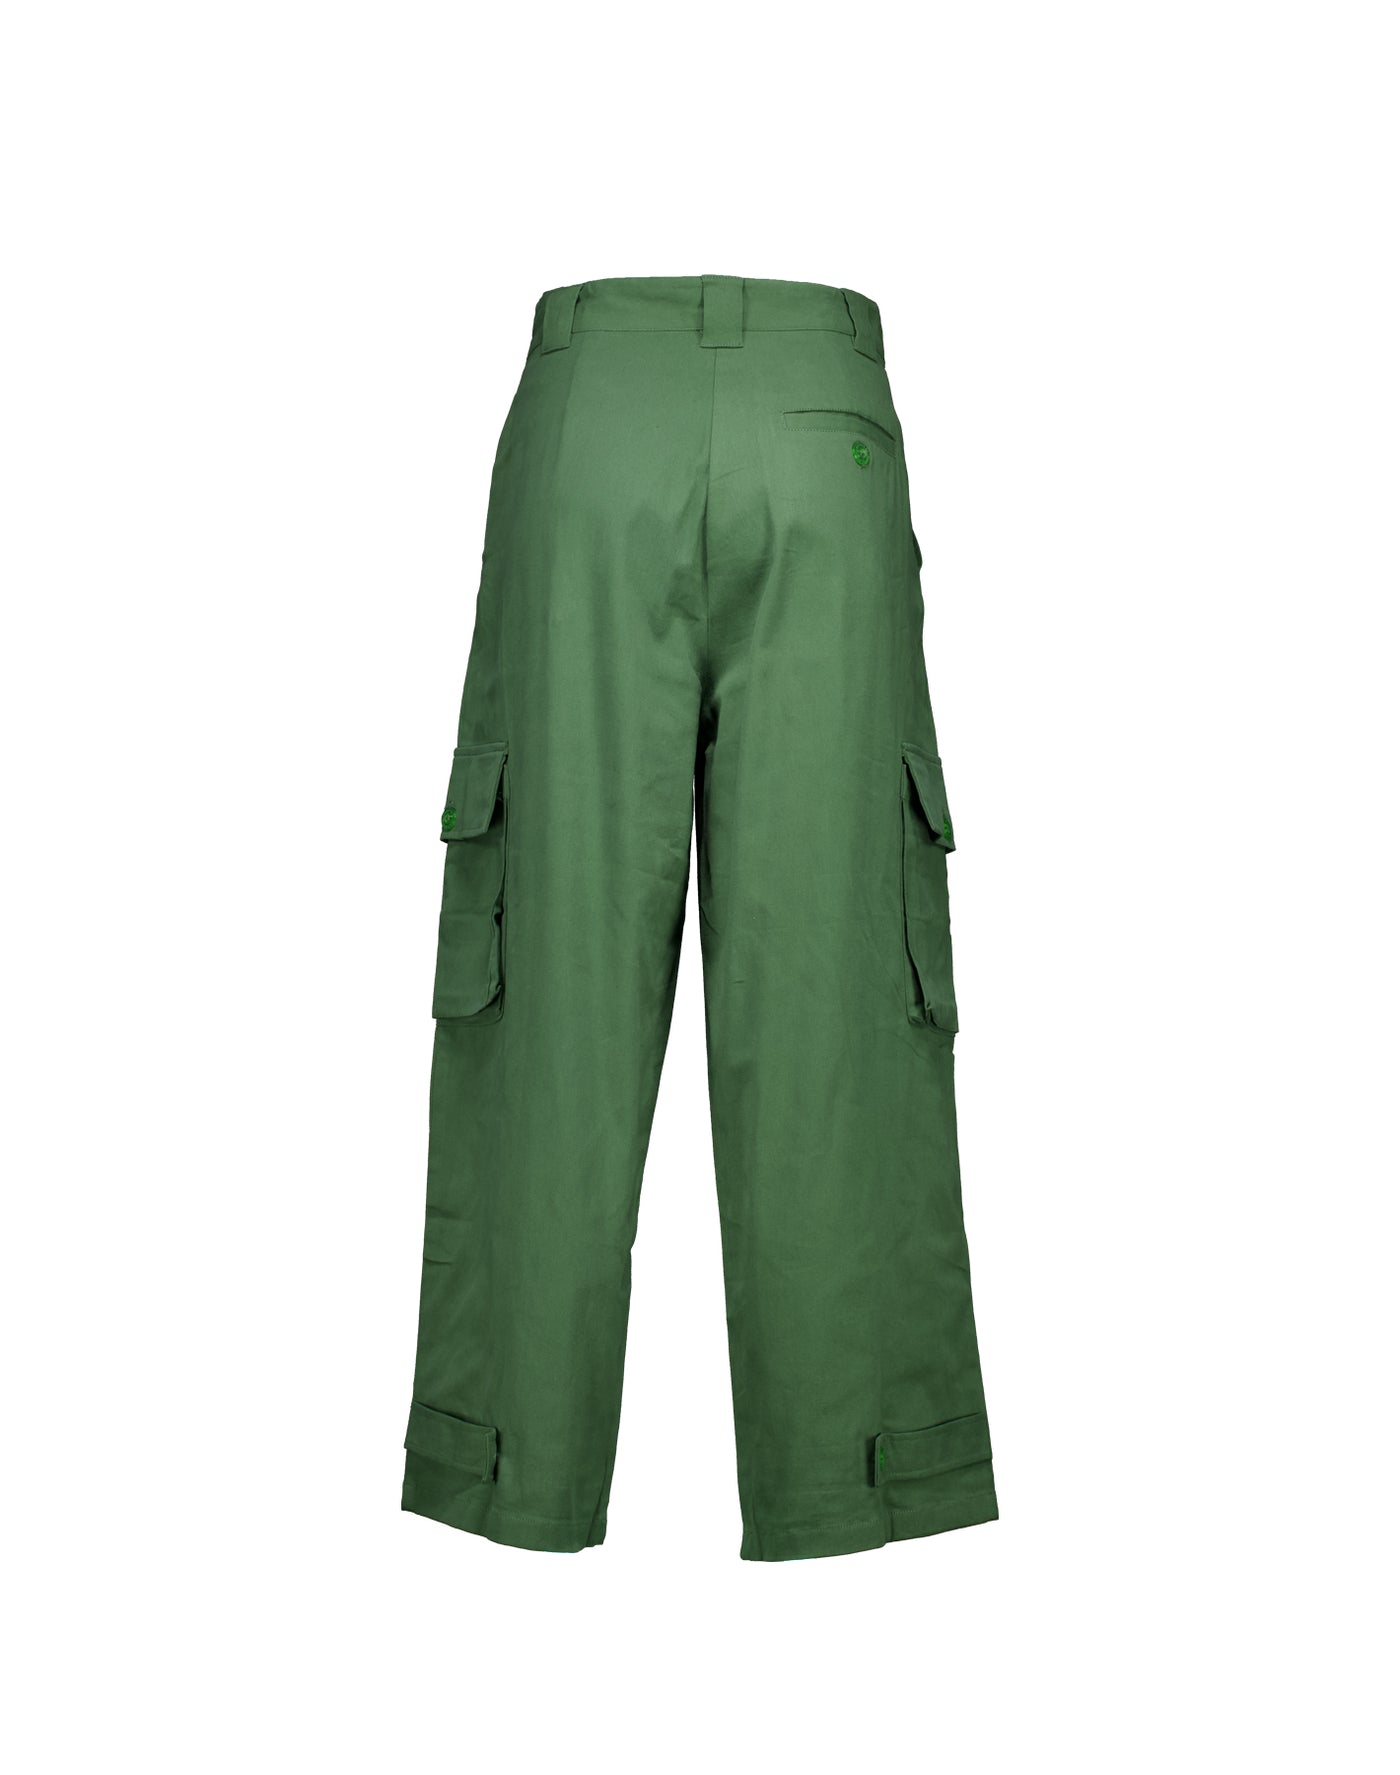 The Cargo Pant